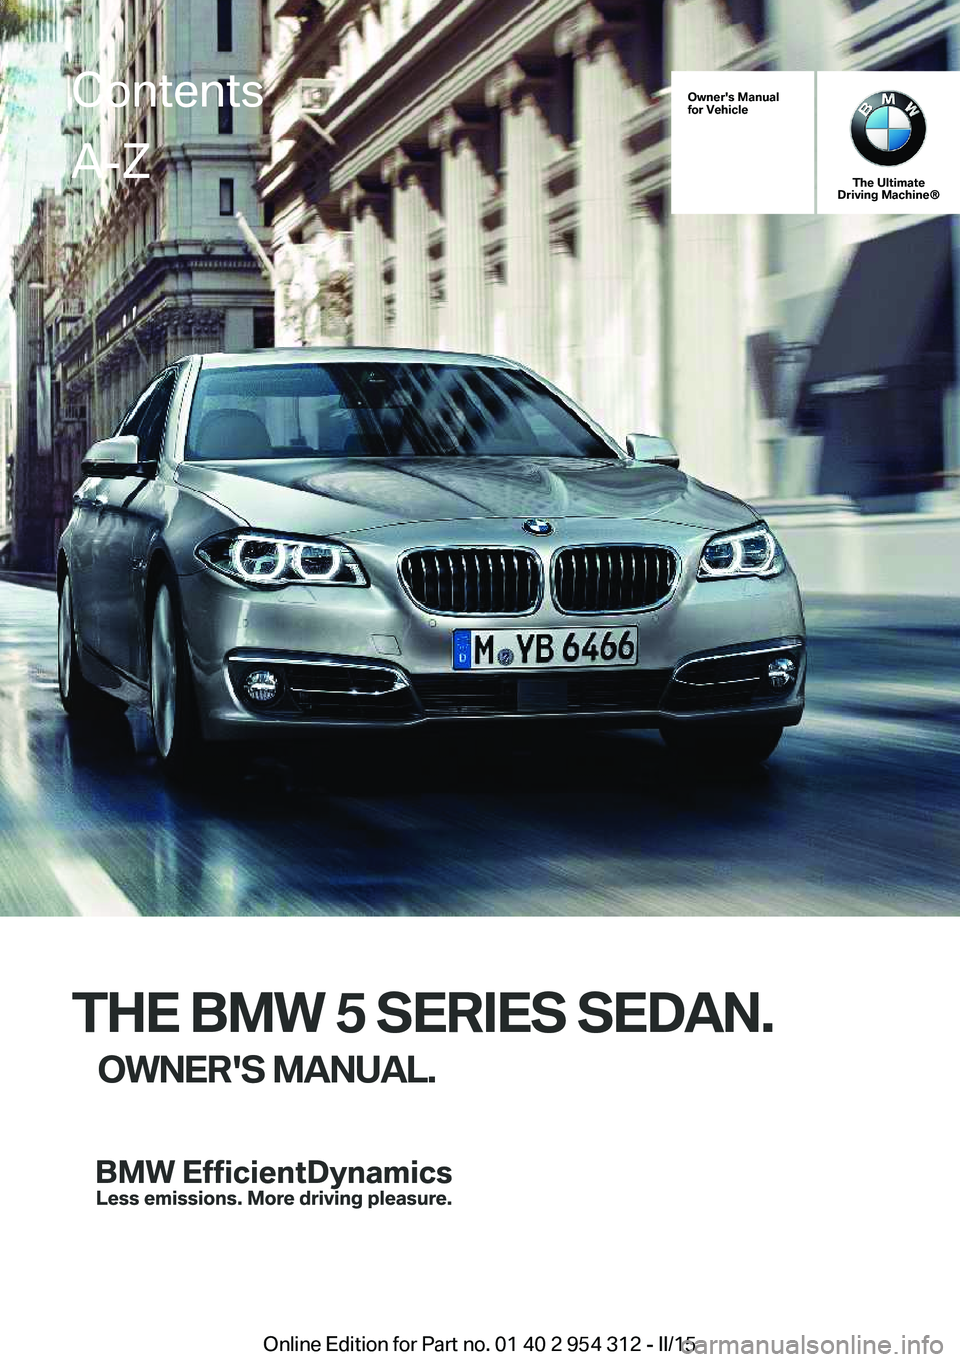 BMW 535D SEDAN 2015  Owners Manual Owner's Manual
for Vehicle
The Ultimate
Driving Machine®
THE BMW 5 SERIES SEDAN.
OWNER'S MANUAL.
ContentsA-Z
Online Edition for Part no. 01 40 2 954 312 - II/15   